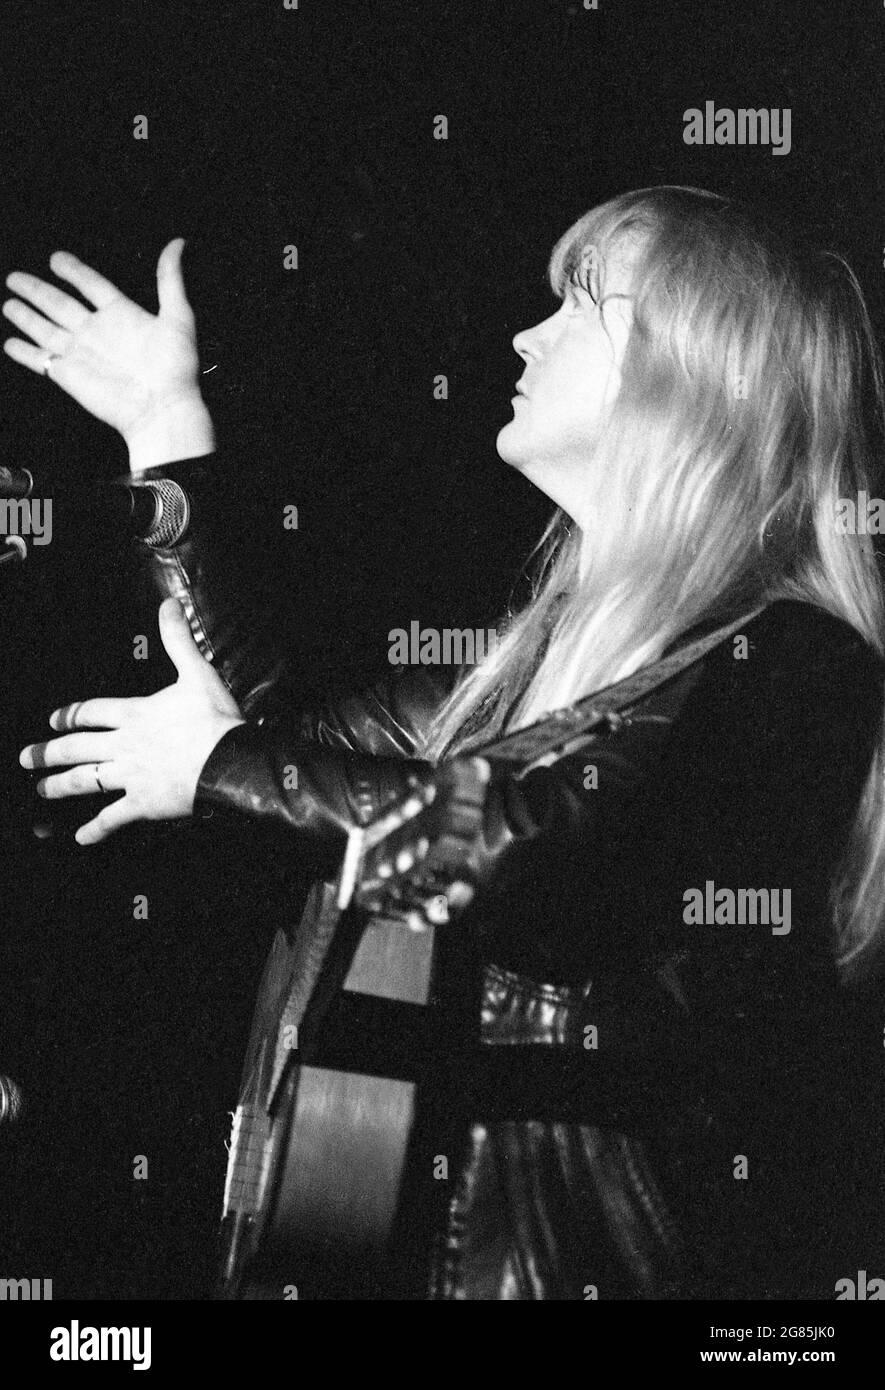 black and white image of Christian rock musician, Larry Norman, performing at a concert in Brisbane, Australia, December 1982 Stock Photo